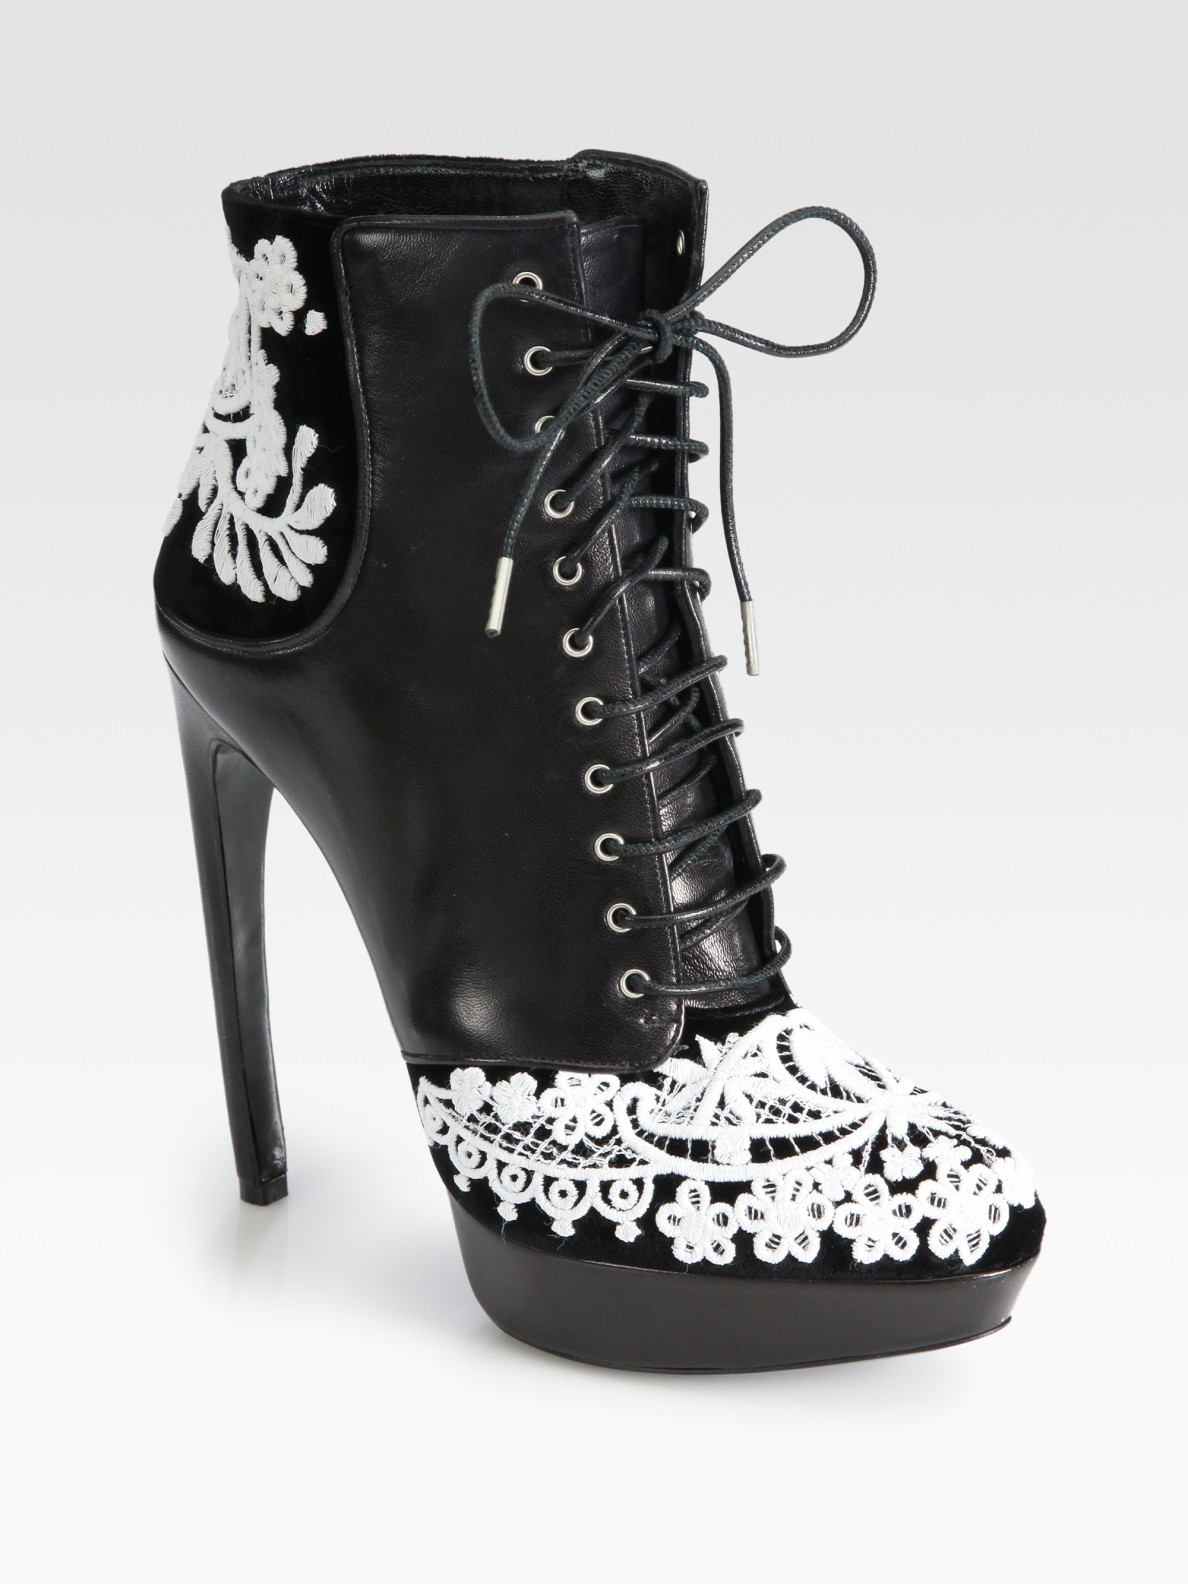 Lyst - Alexander mcqueen Leather Embroidered Velvet Laceup Ankle Boots in Black1188 x 1584